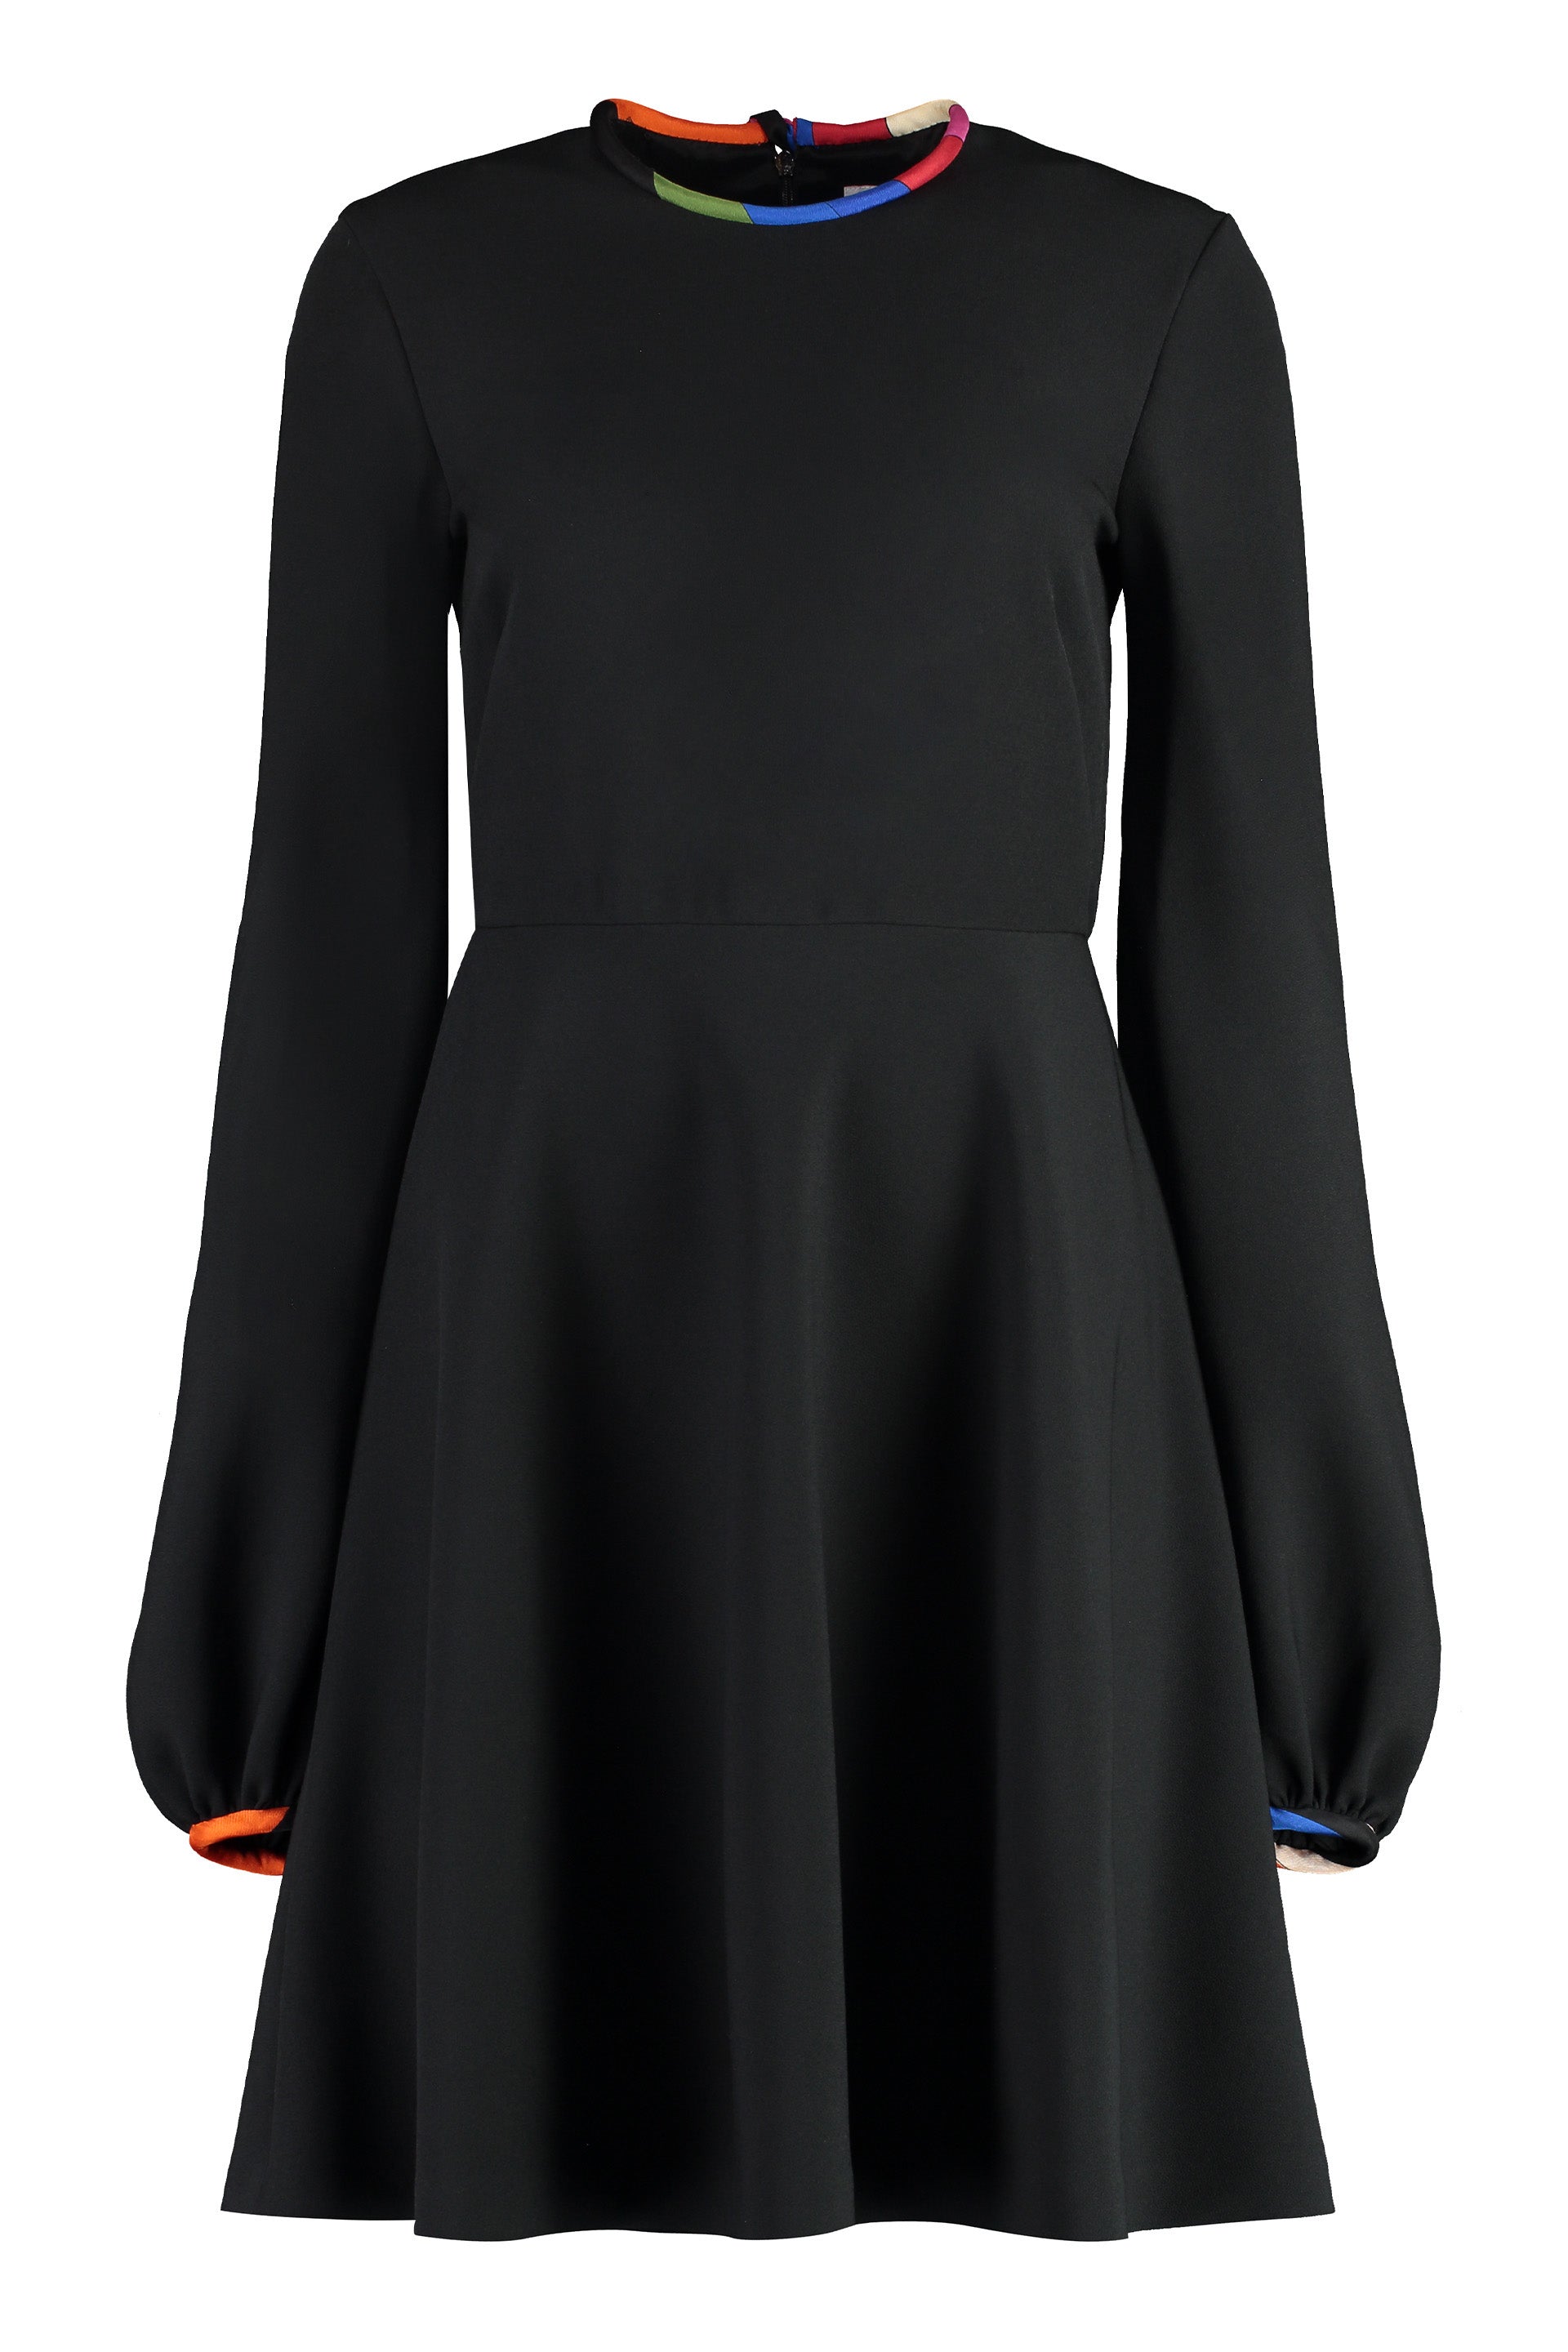 Emilio Pucci Black Contrast Insert Dress With Balloon Sleeves And Back Bow For Women